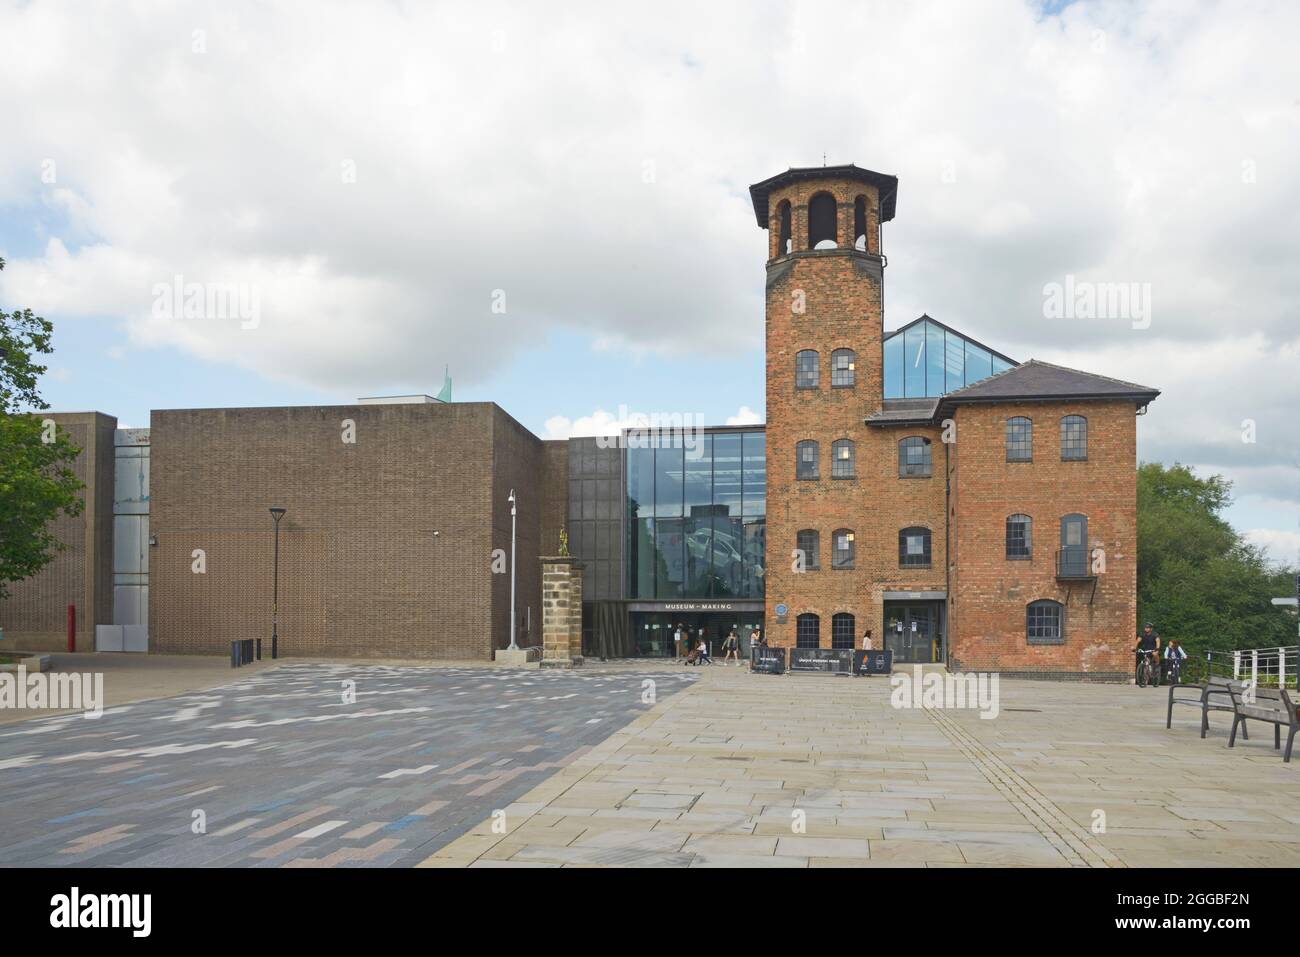 Museum of making, in Derby. Stock Photo